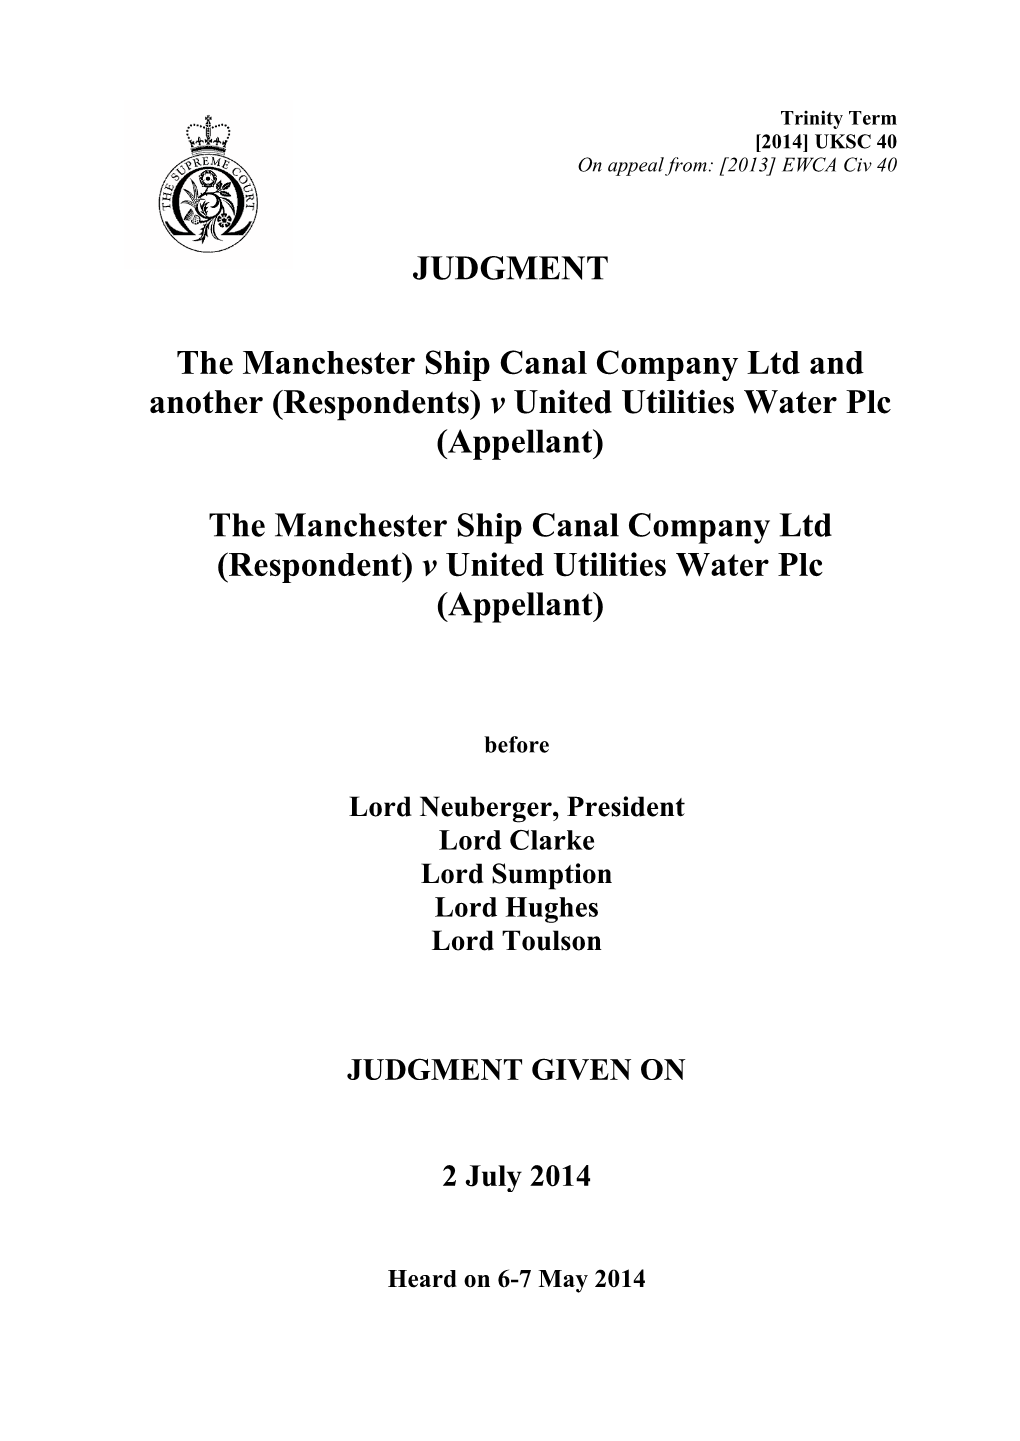 The Manchester Ship Canal Company Ltd and Another (Respondents) V United Utilities Water Plc (Appellant), the Manchester Ship Ca